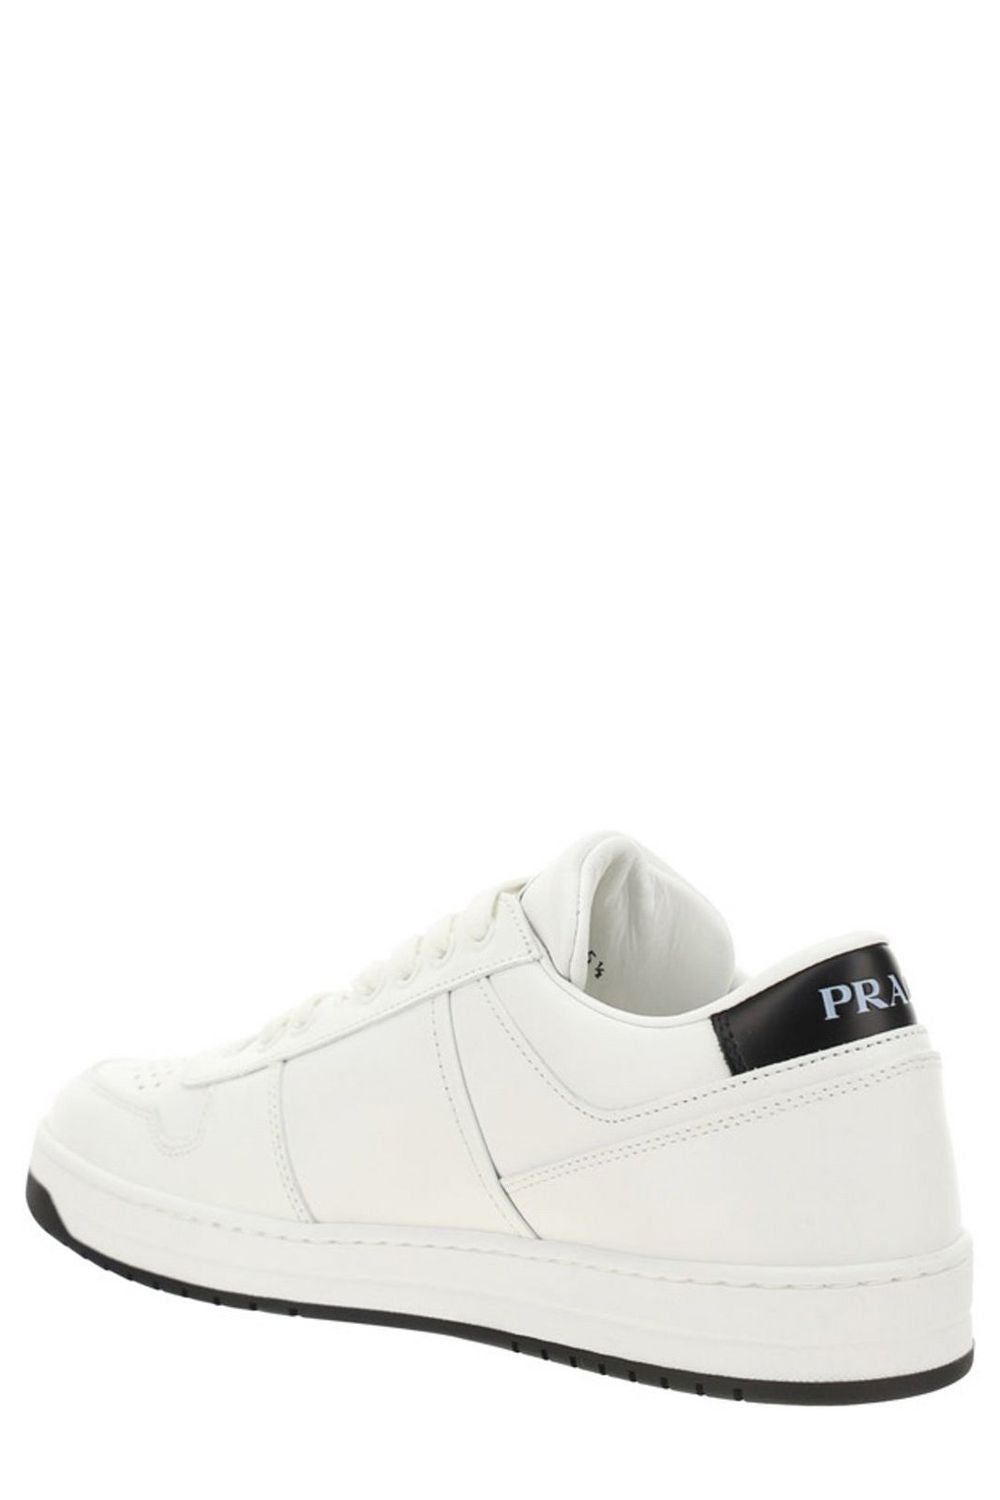 PRADA Black and White Leather Low Top Sneakers for Men